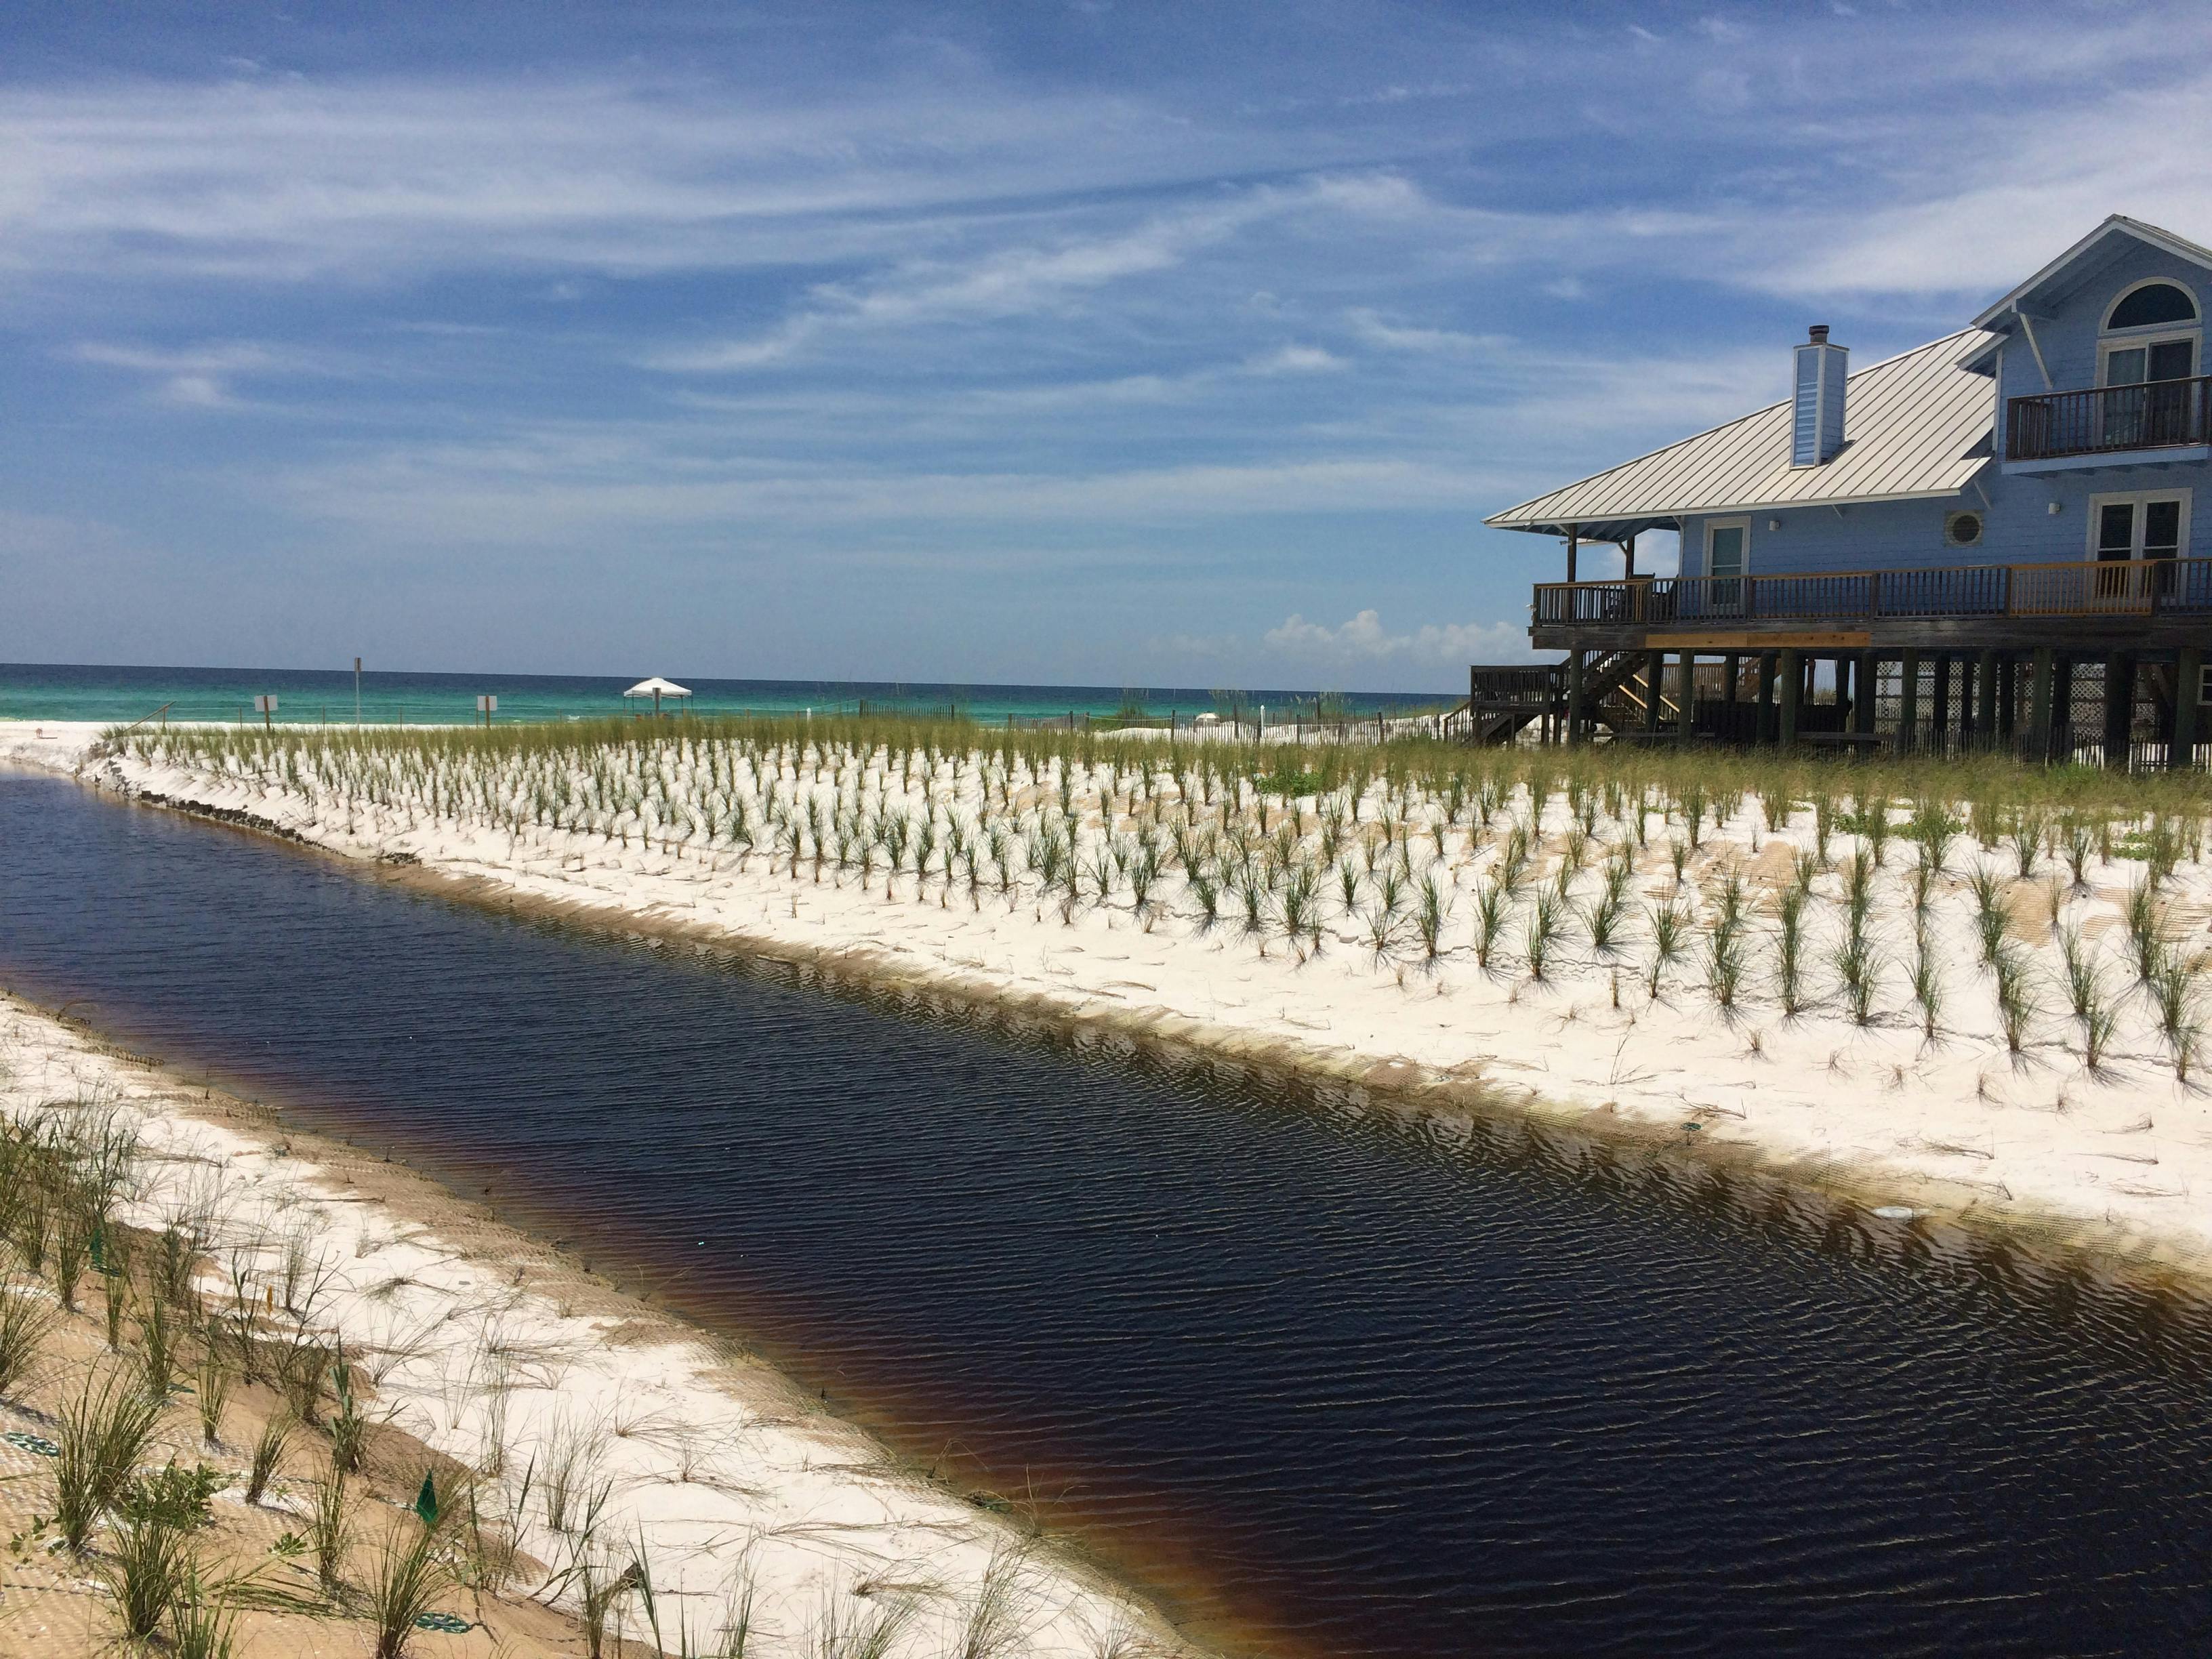 Oyster Lake's outfall, strained by storms and urban growth, was reinforced using PROPEX Armormax for erosion control. It withstood Hurricane Michael, protecting the area.